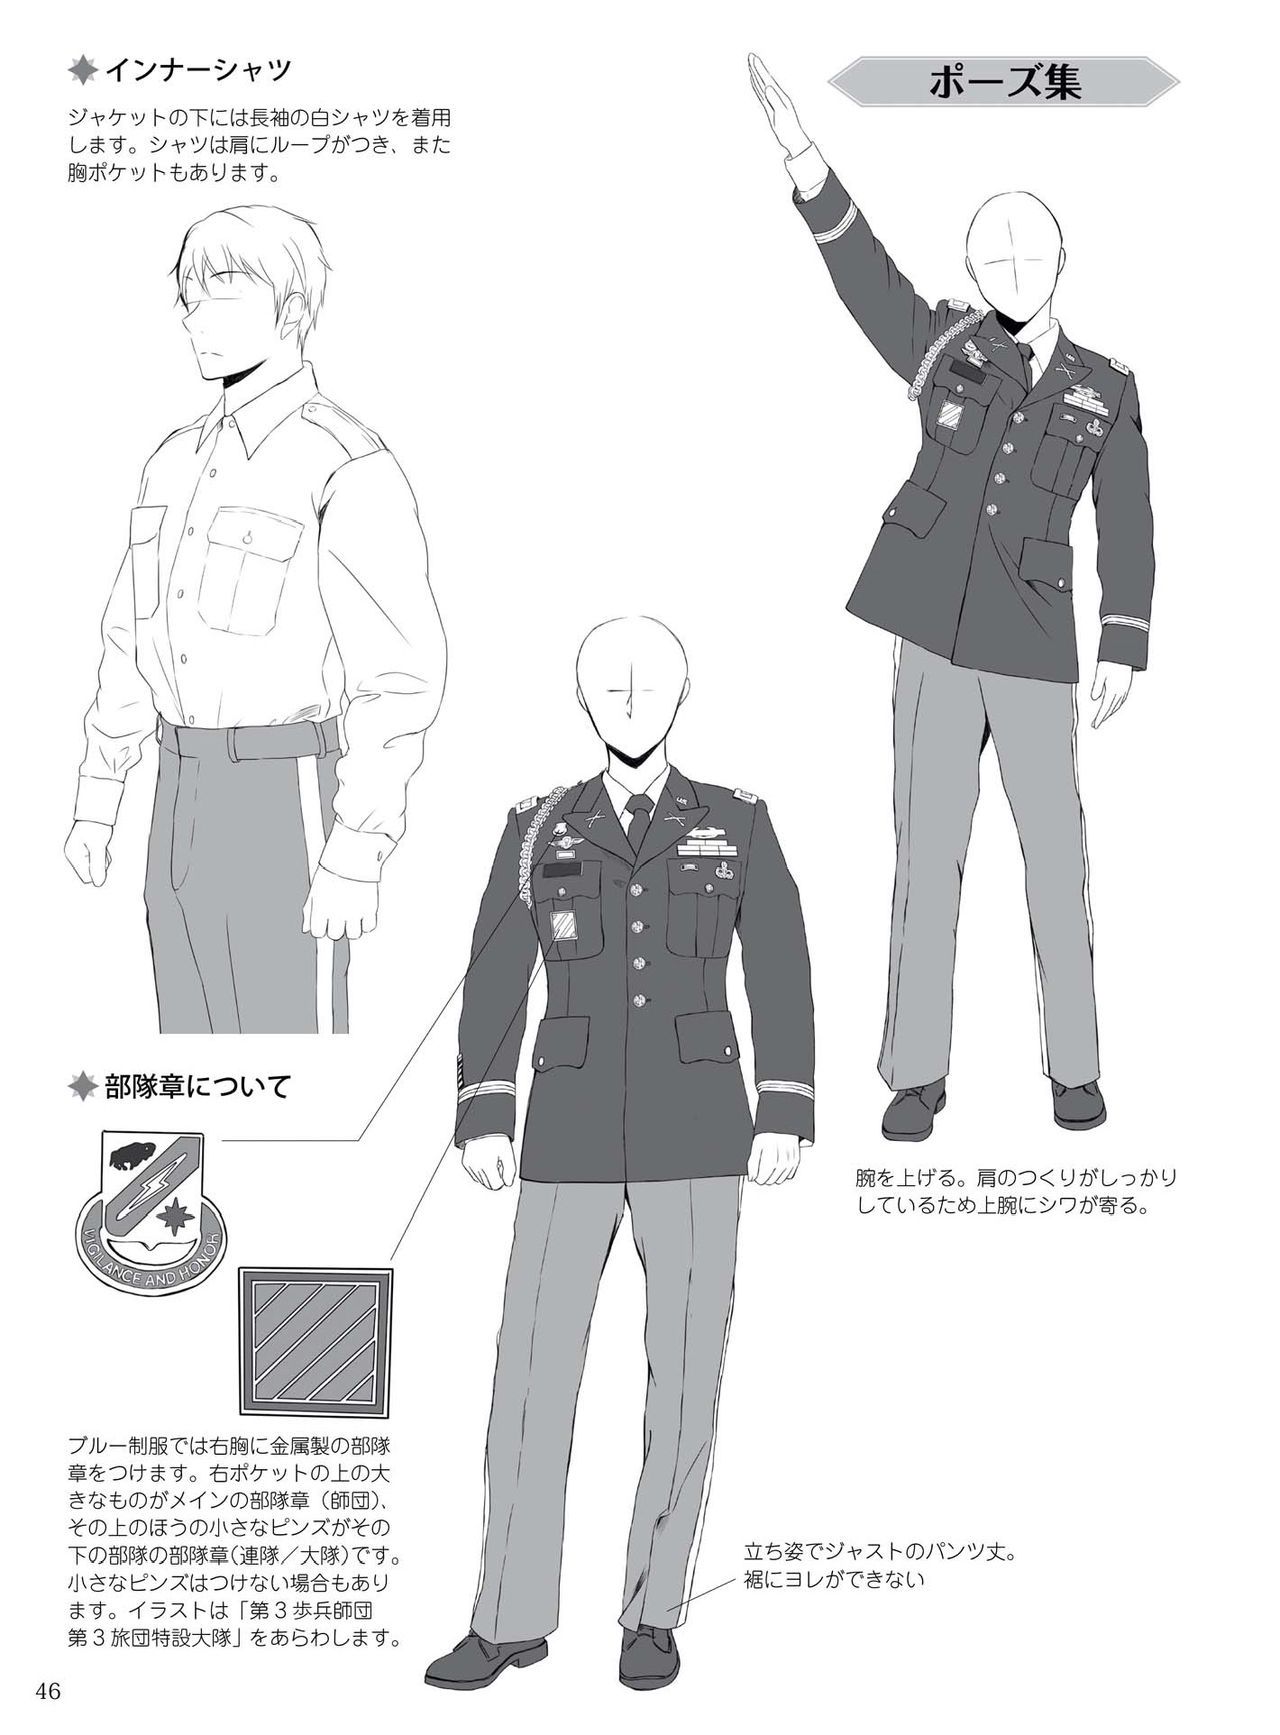 How to draw military uniforms and uniforms From Self-Defense Forces 軍服・制服の描き方 アメリカ軍・自衛隊の制服から戦闘服まで 49